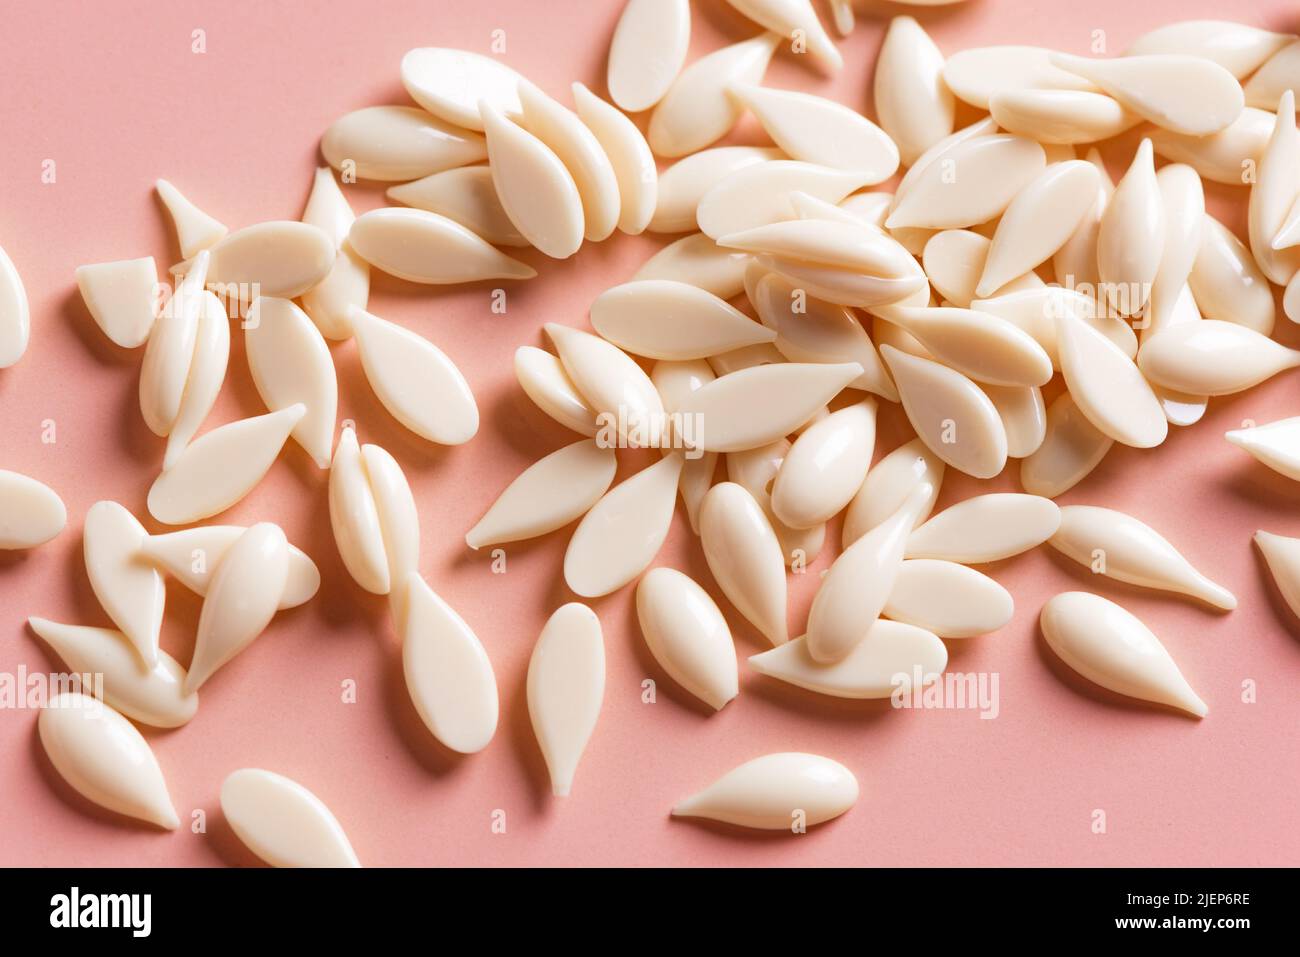 Natural depilatory film wax bean granules on pink background close up. Hair removal, natural beauty concept,  pearl wax. Stock Photo